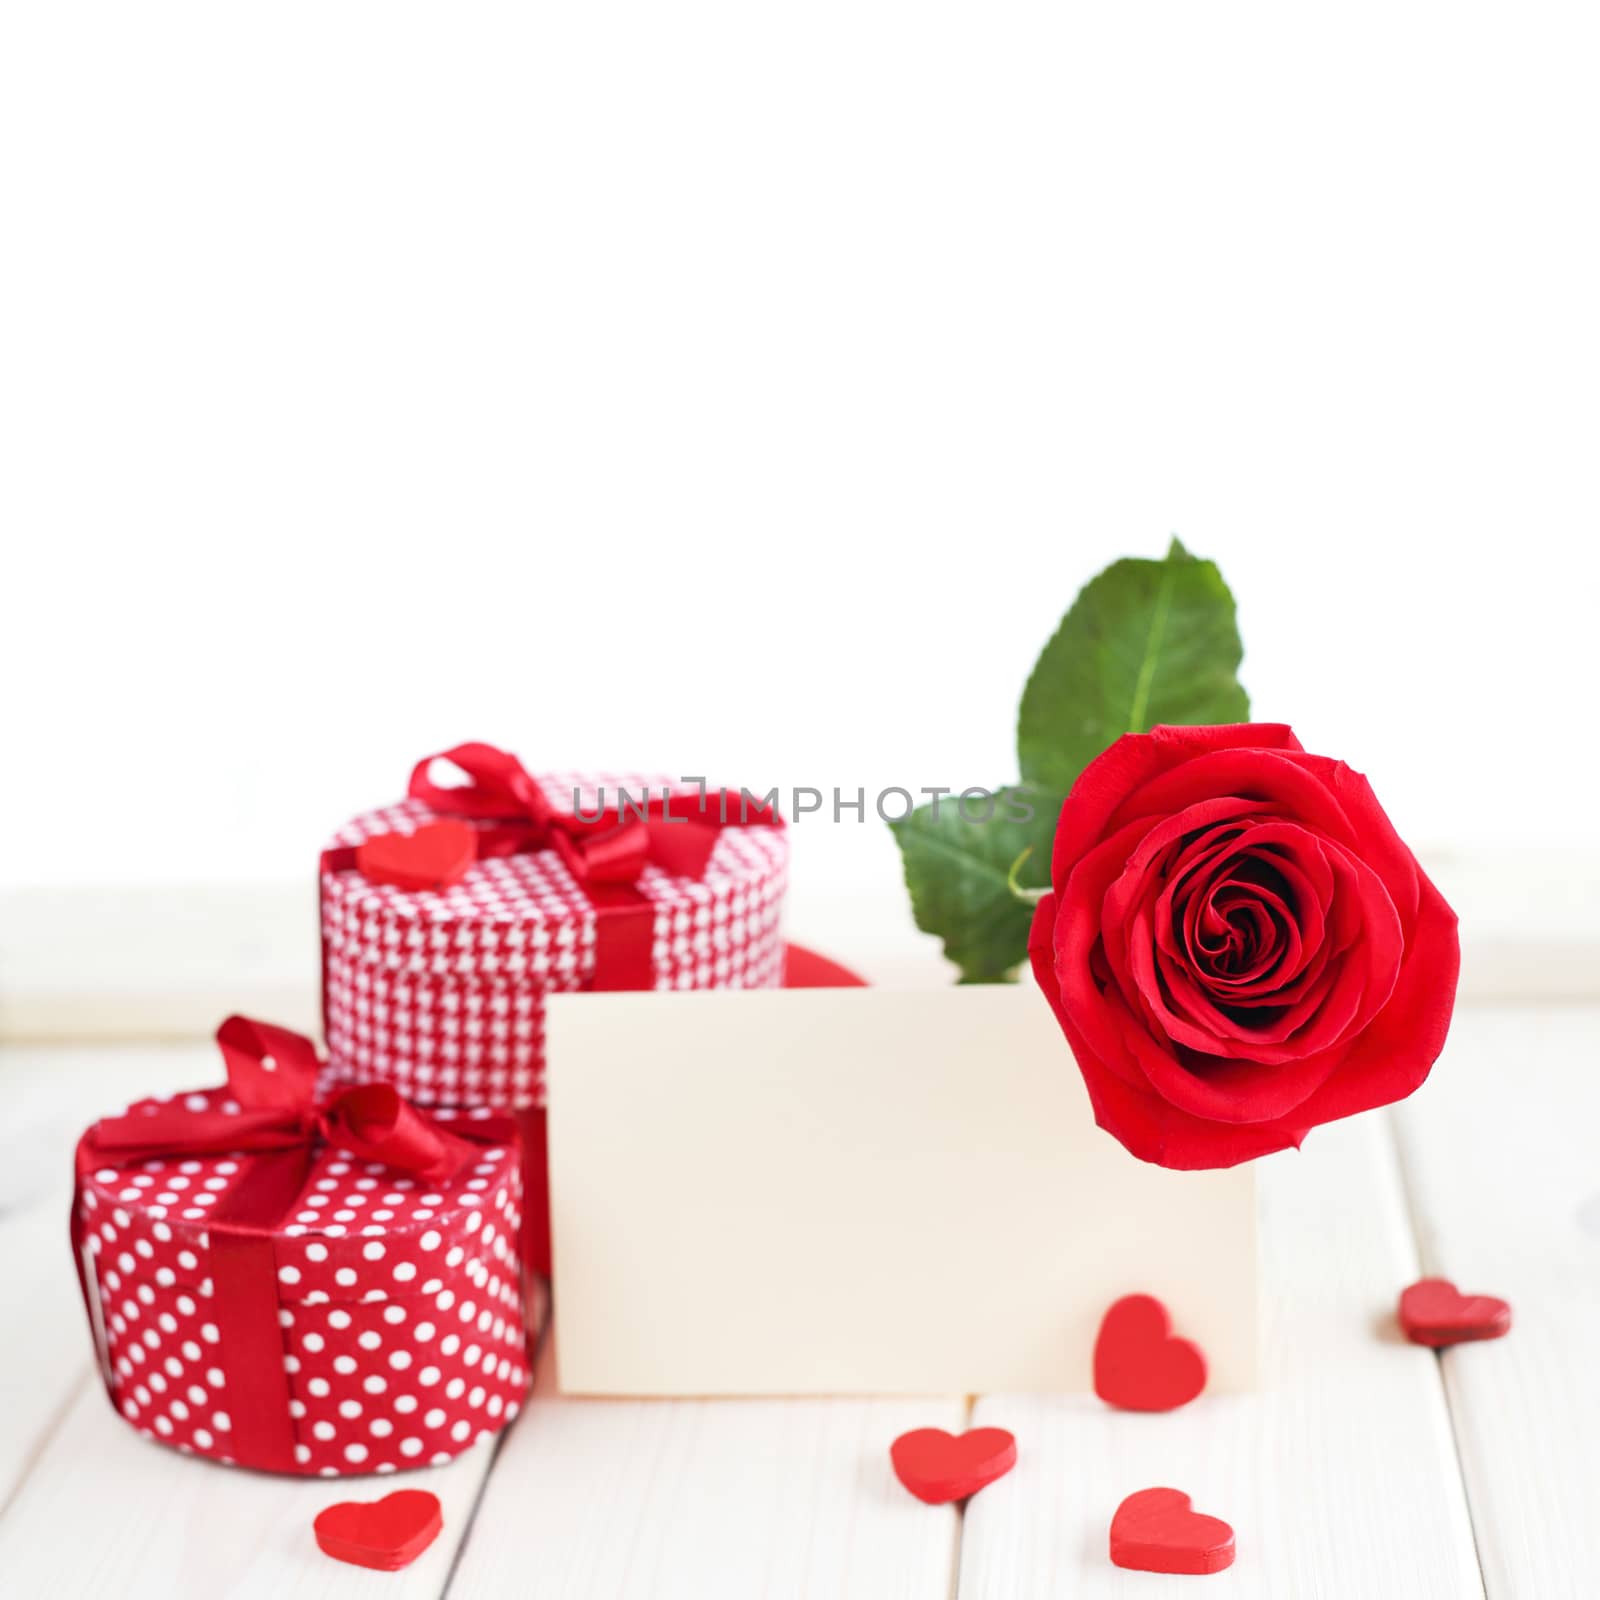 Red rose, heart and blank card on wooden table, valentines day concept